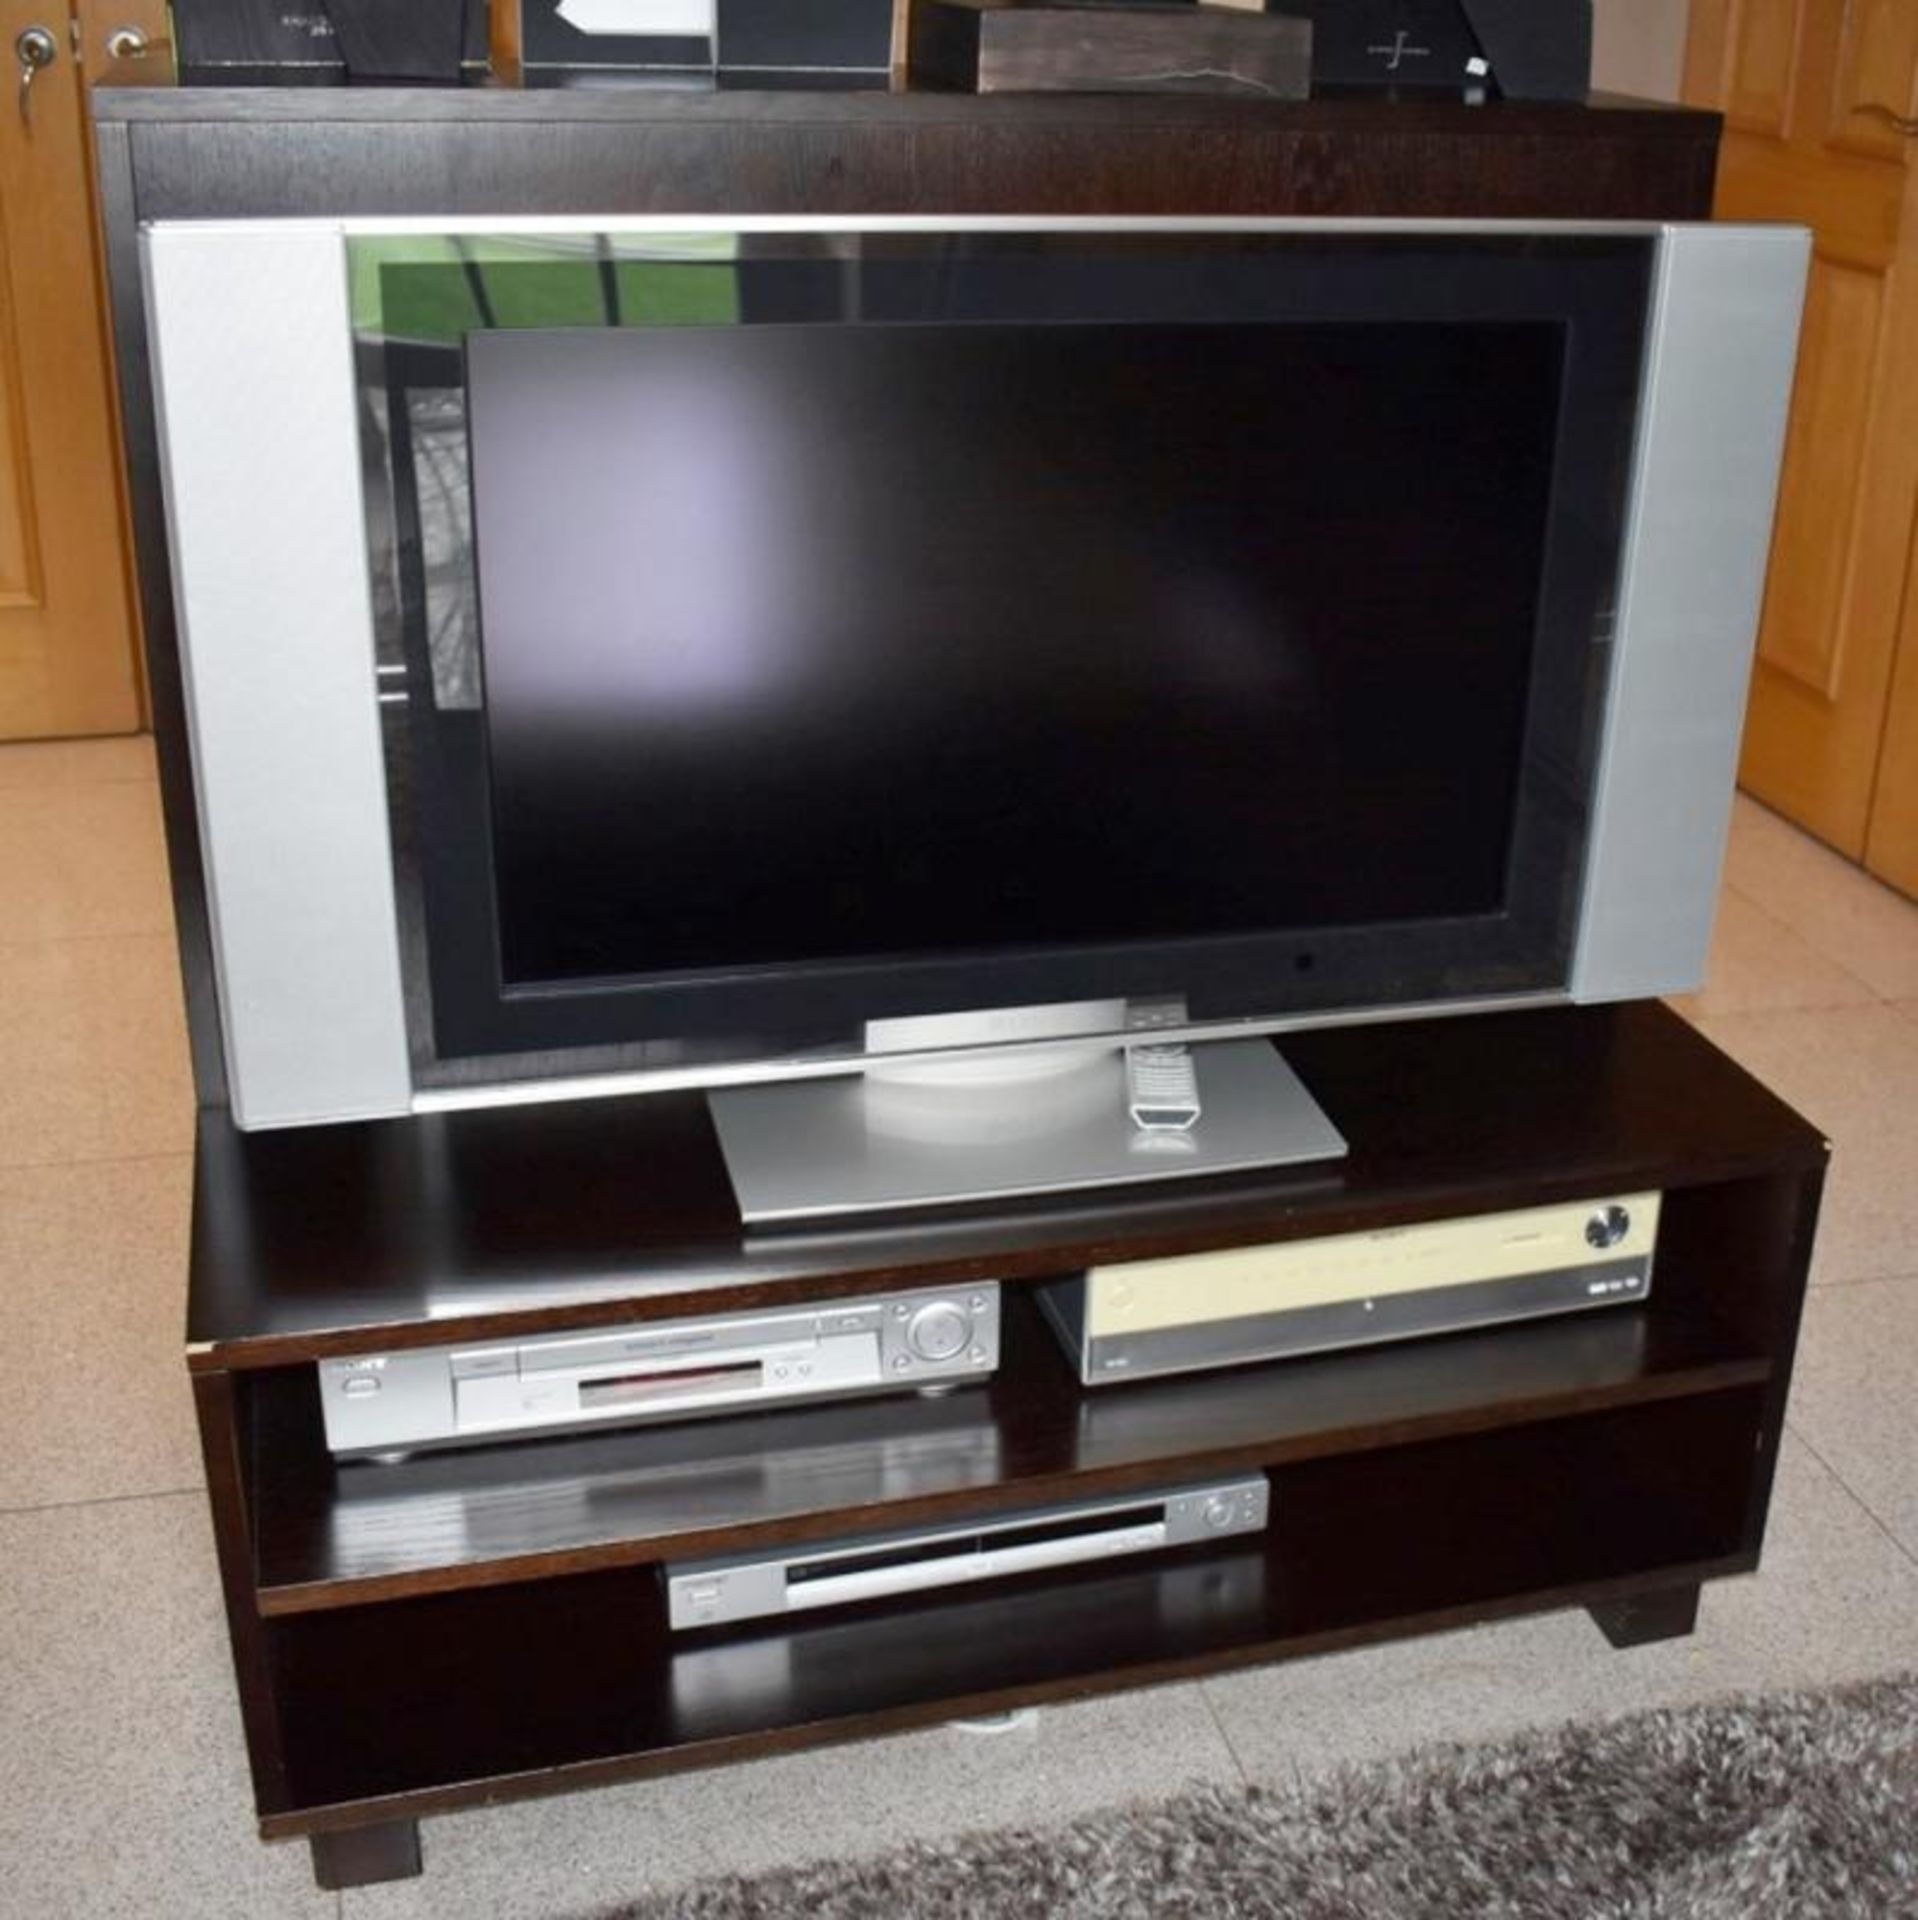 1 x TV Unit With 2-Door Cabinet Storage To The Rear - Dimensions: W105 x D64 x H108cm - Ref: ABR044 - Image 4 of 7